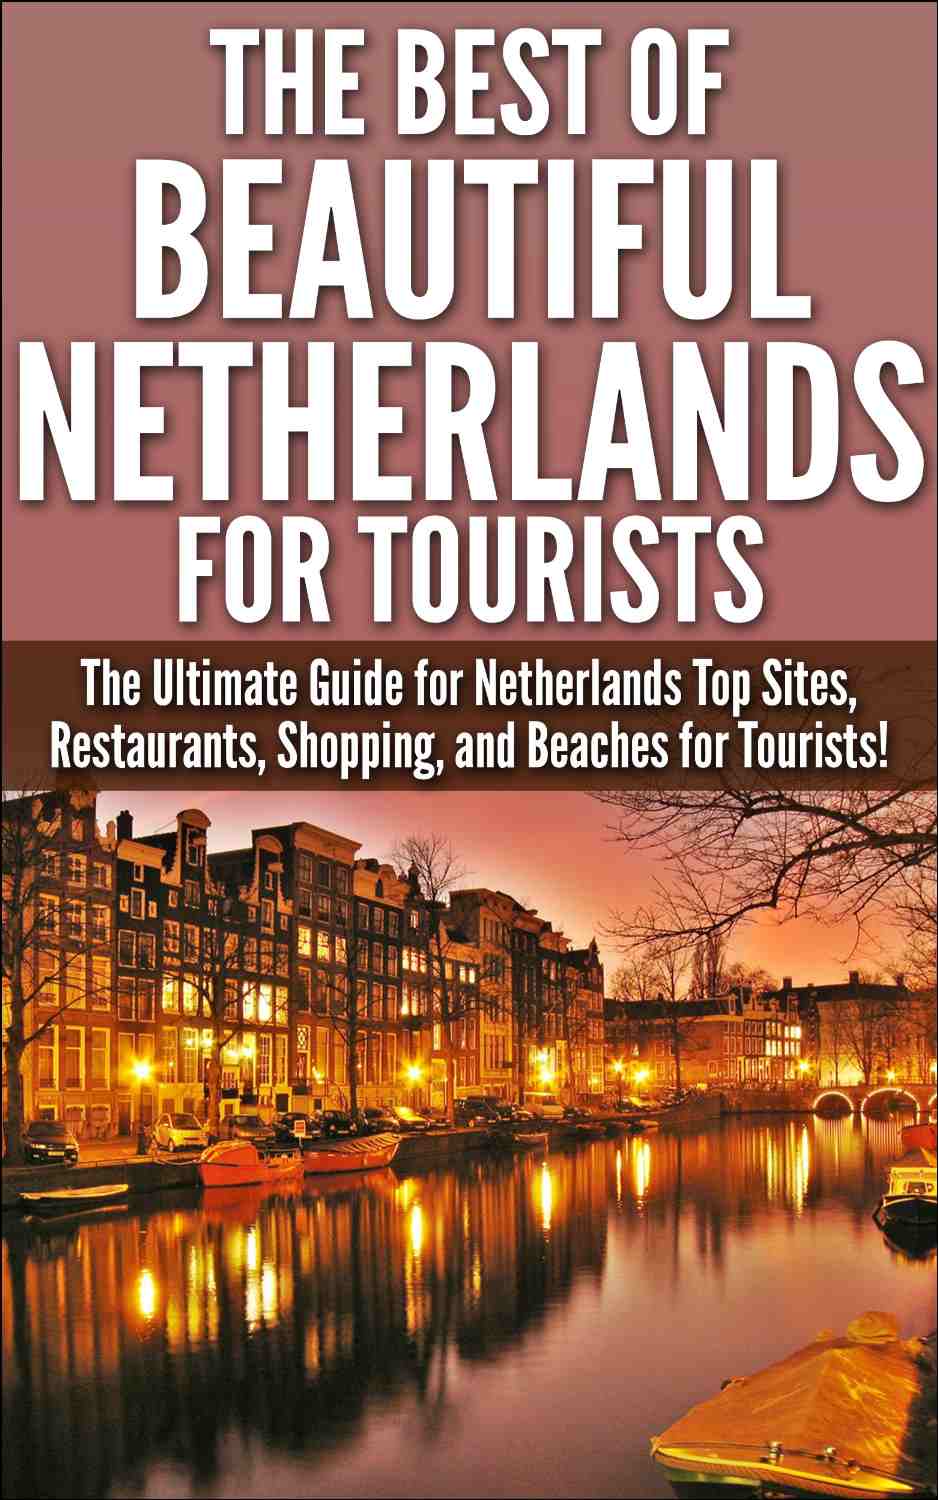 The Best Of Beautiful Netherlands for Tourists by Getaway Guides